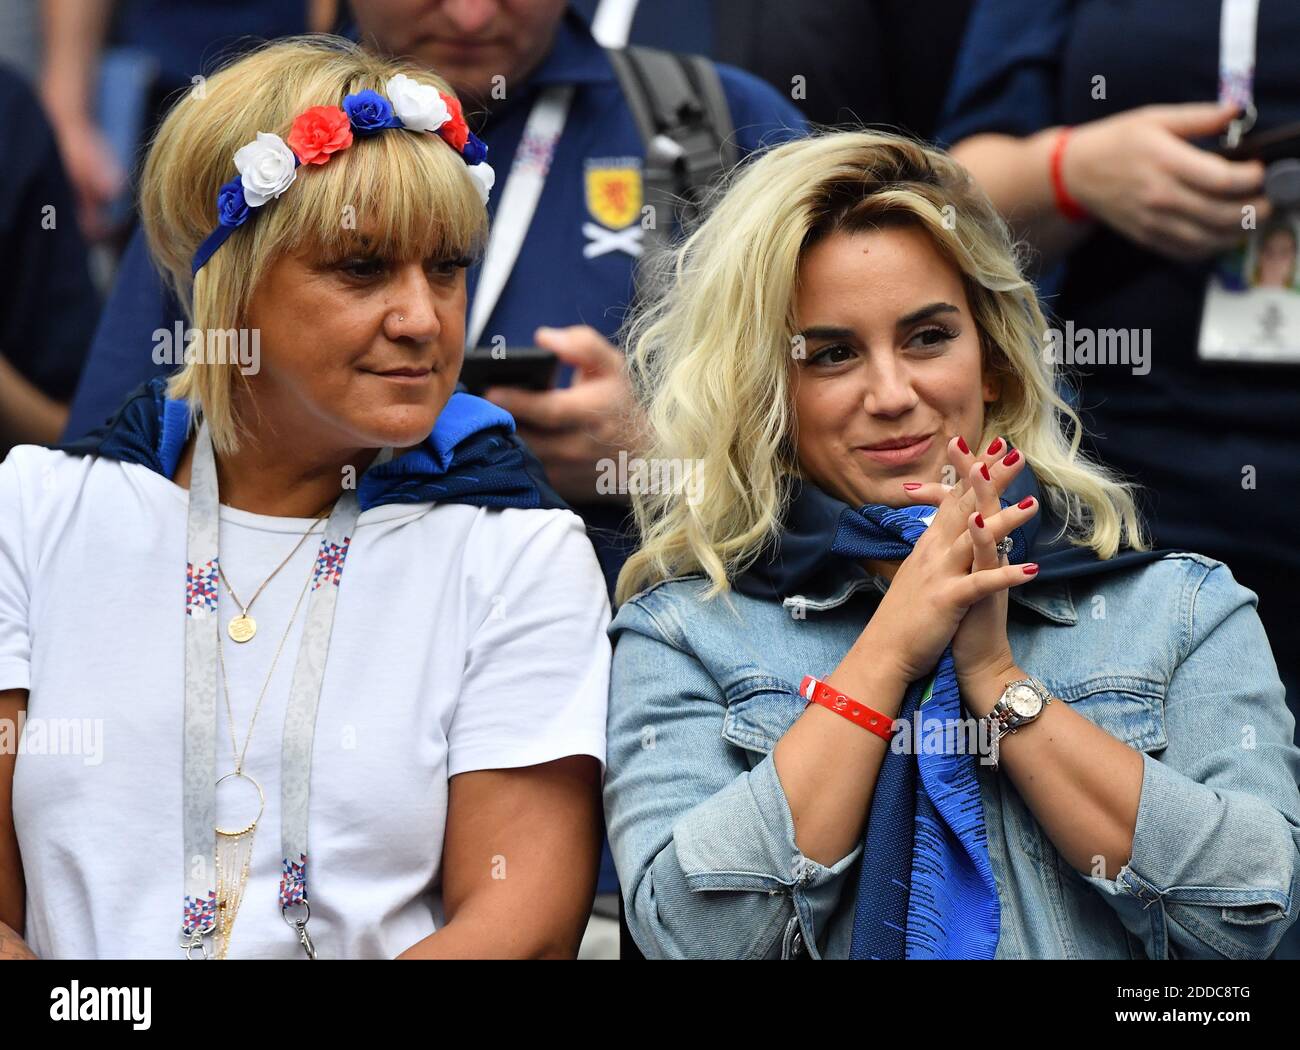 Antoine Griezmann S Wife Erika Choperena With Isabelle Mother Of Antoine Griezmann During The Fifa World Cup 2018 Round Of 8 Match At The Nizhny Novgorod Stadium Russia On July 6 2018